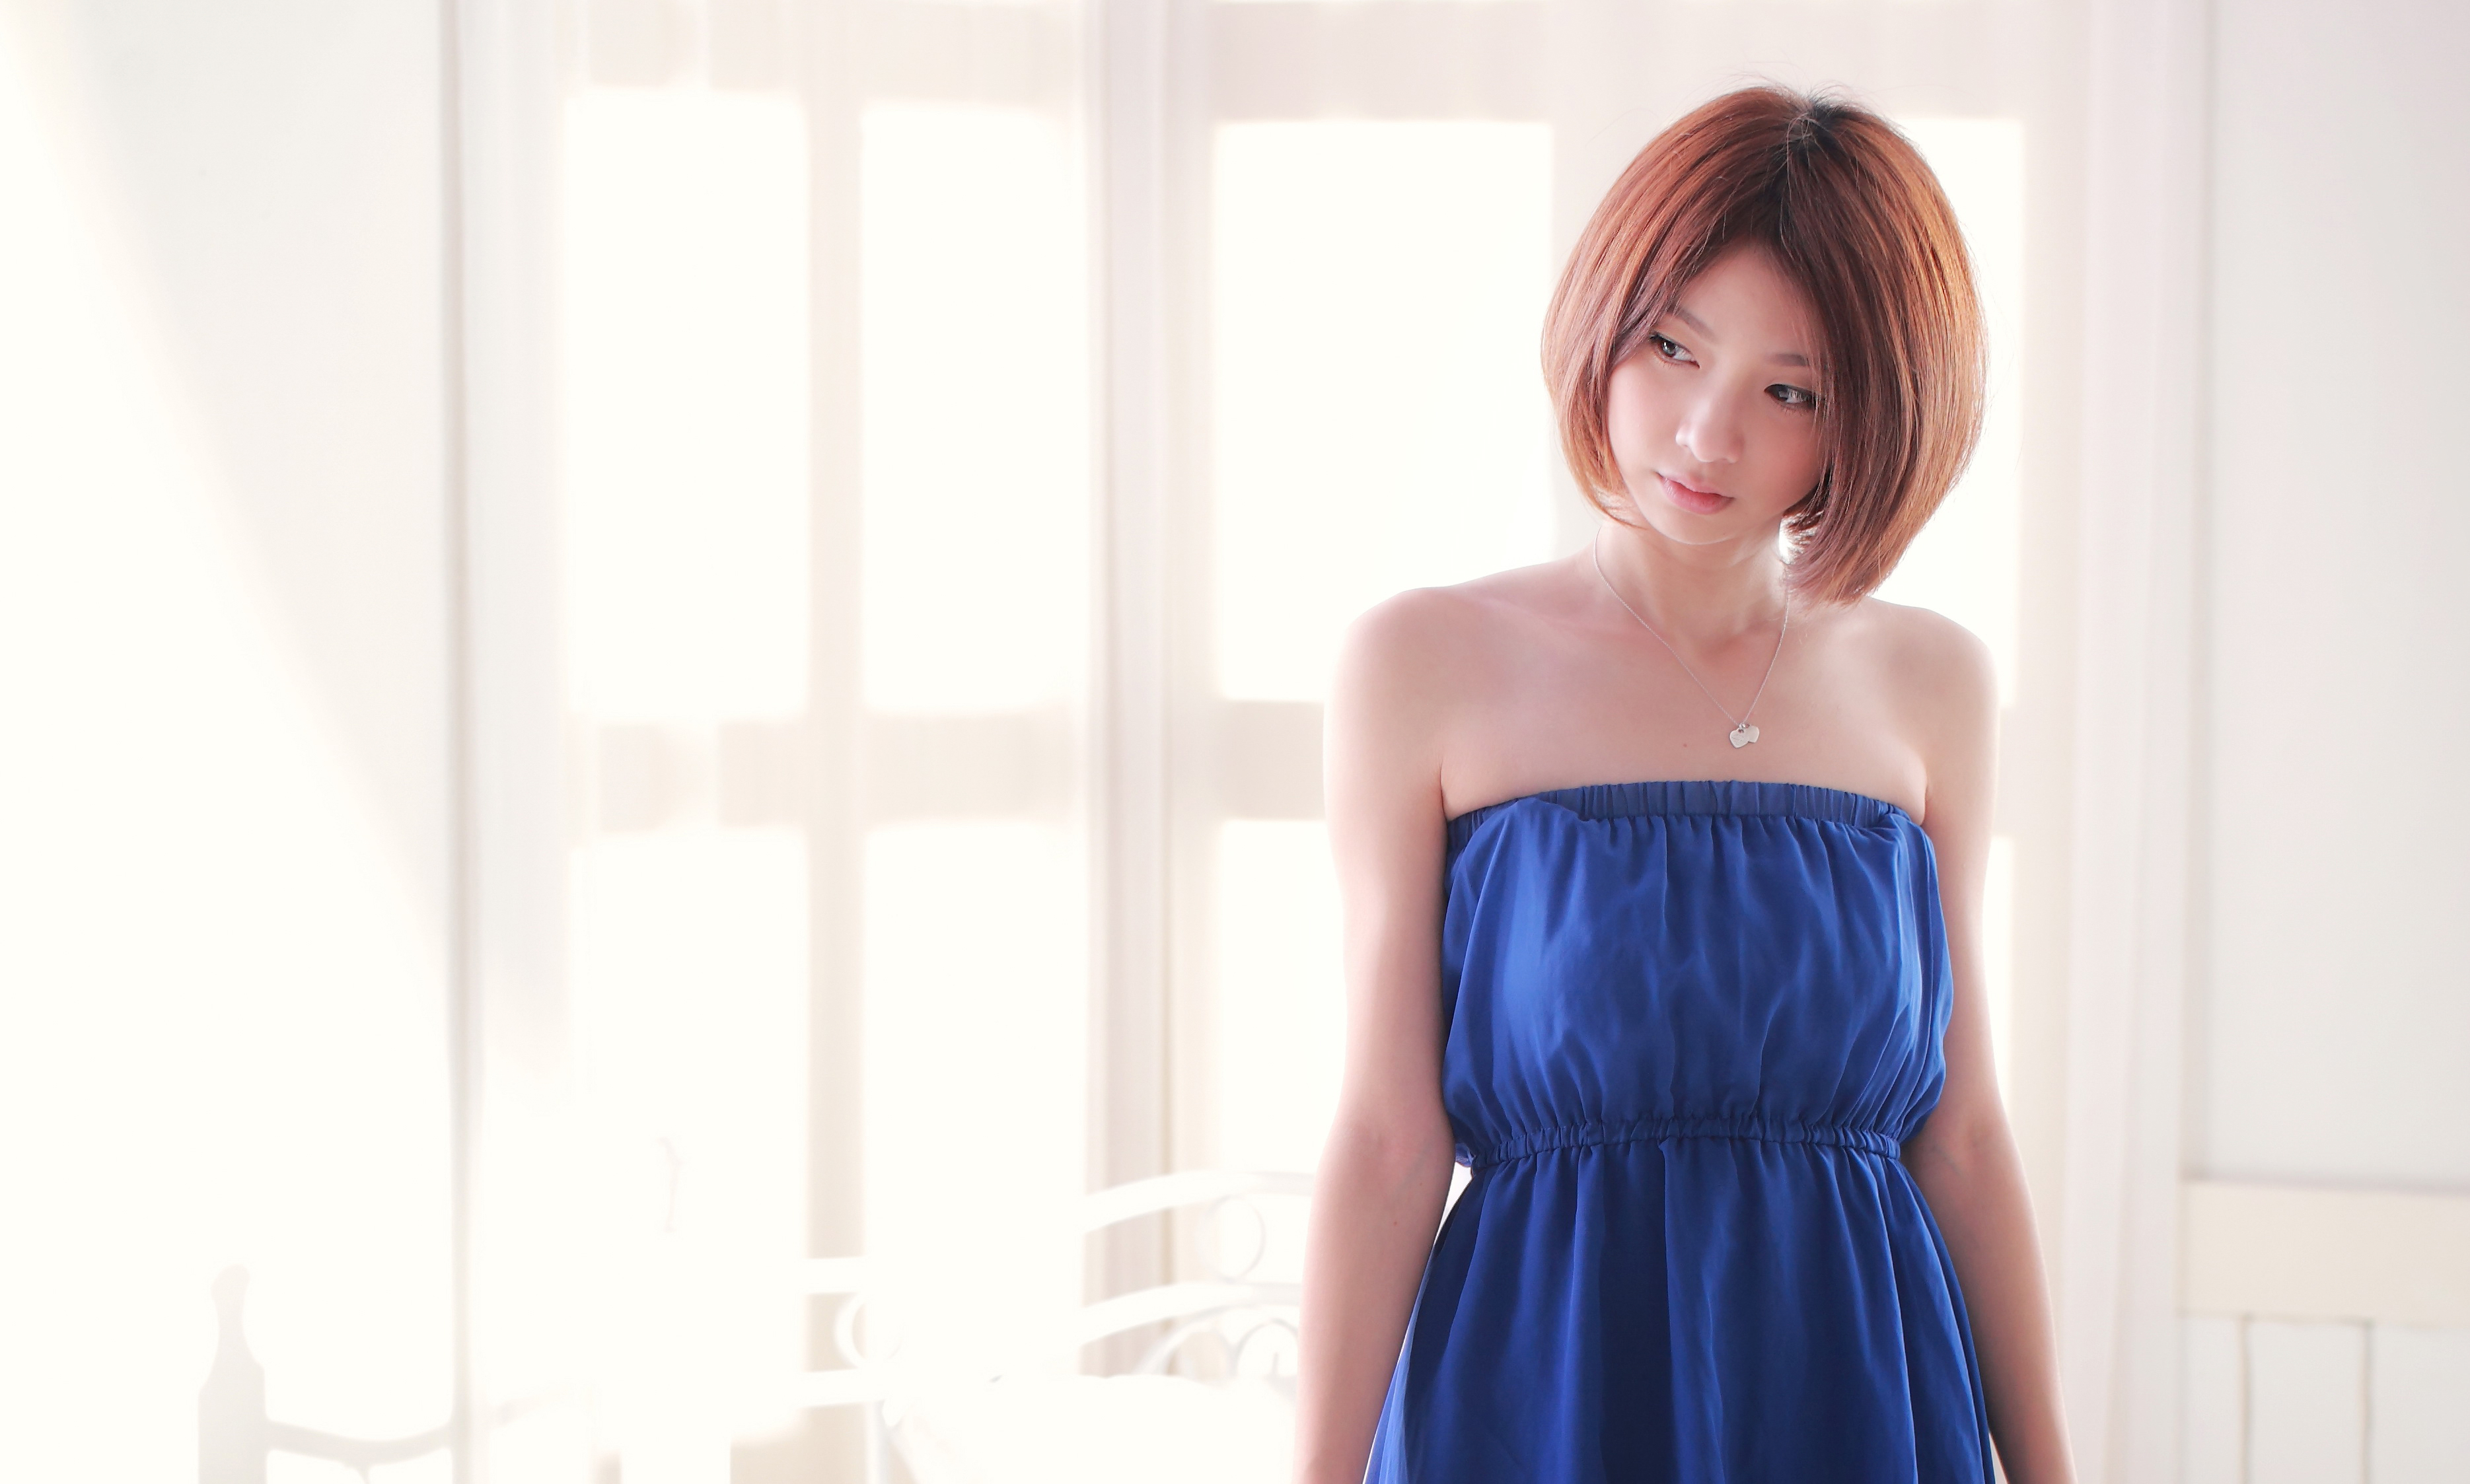 Image: Girl, asian, hairstyle, rack, stand, blue, dress, window